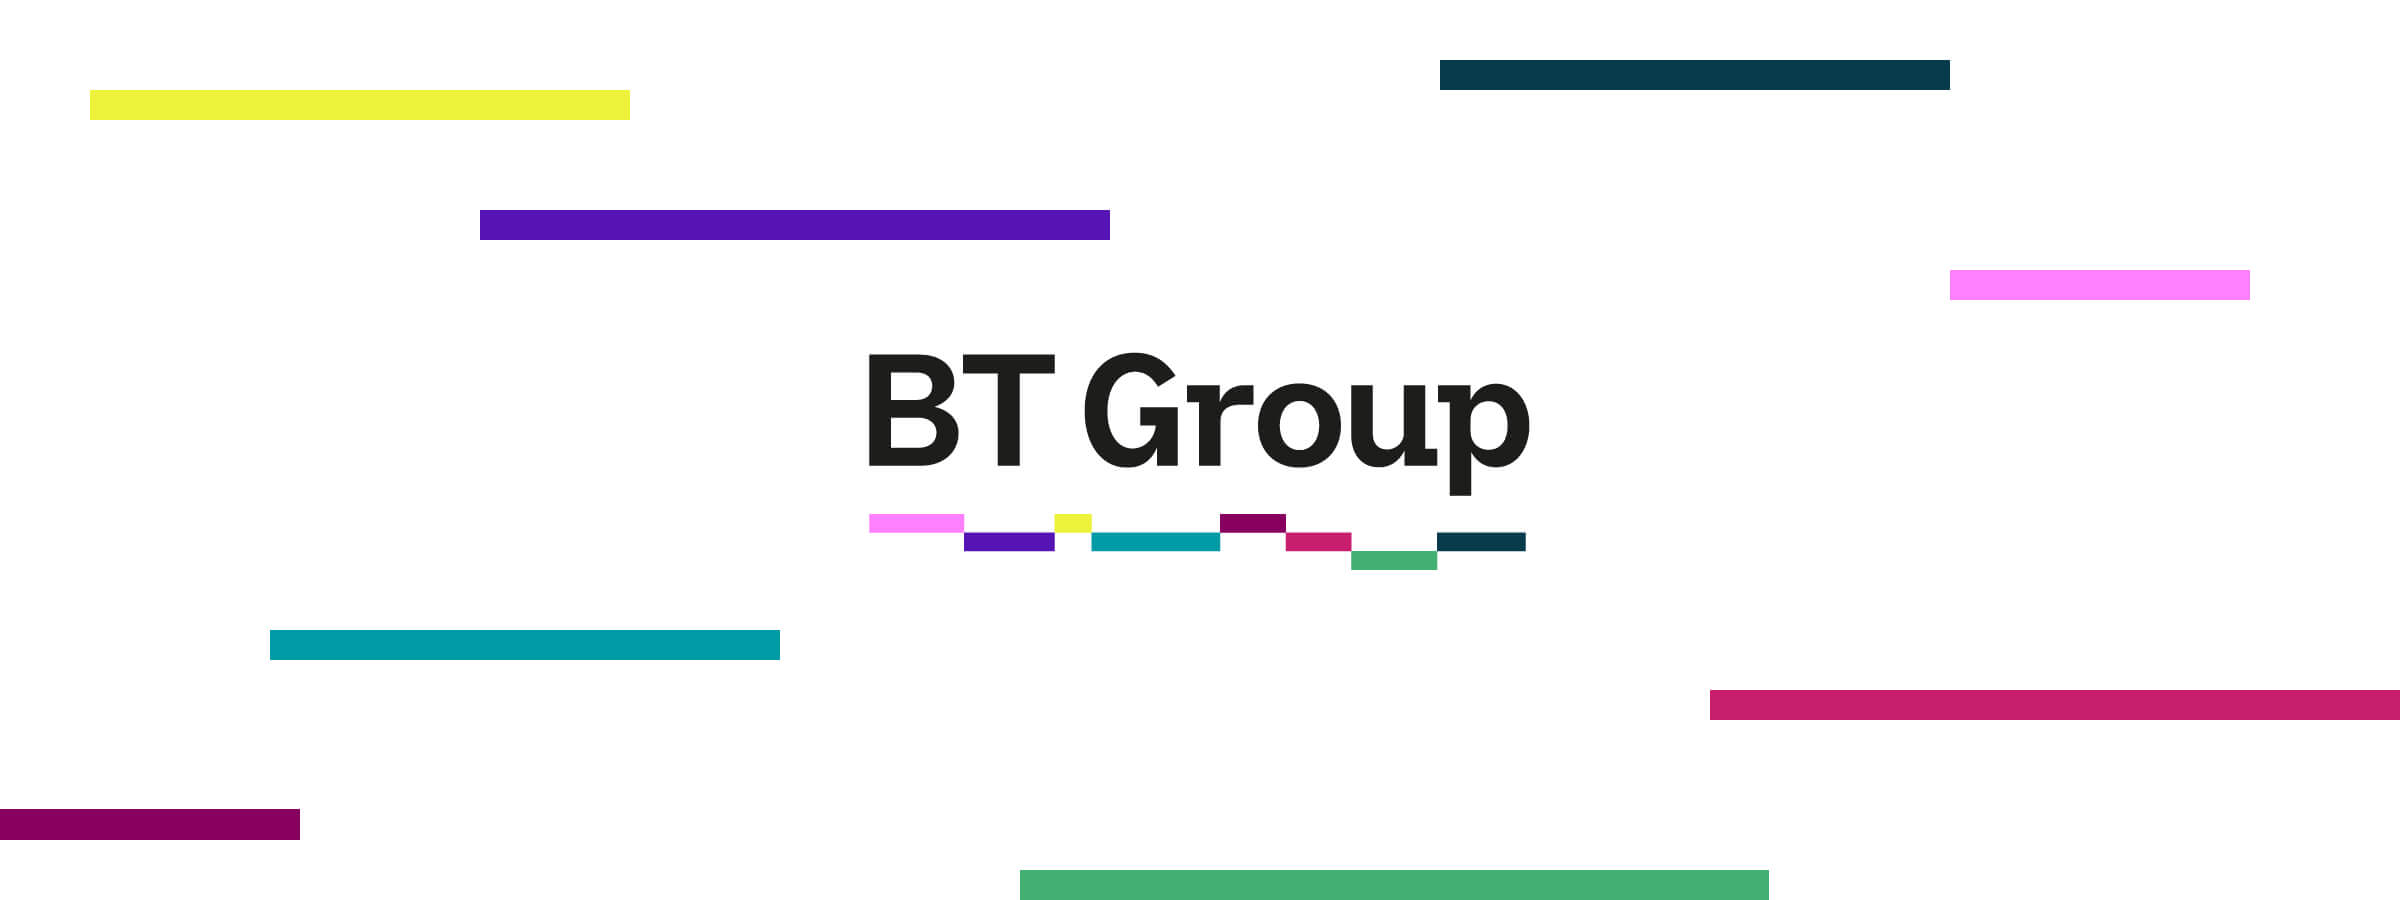 BT Group’s brand architecture